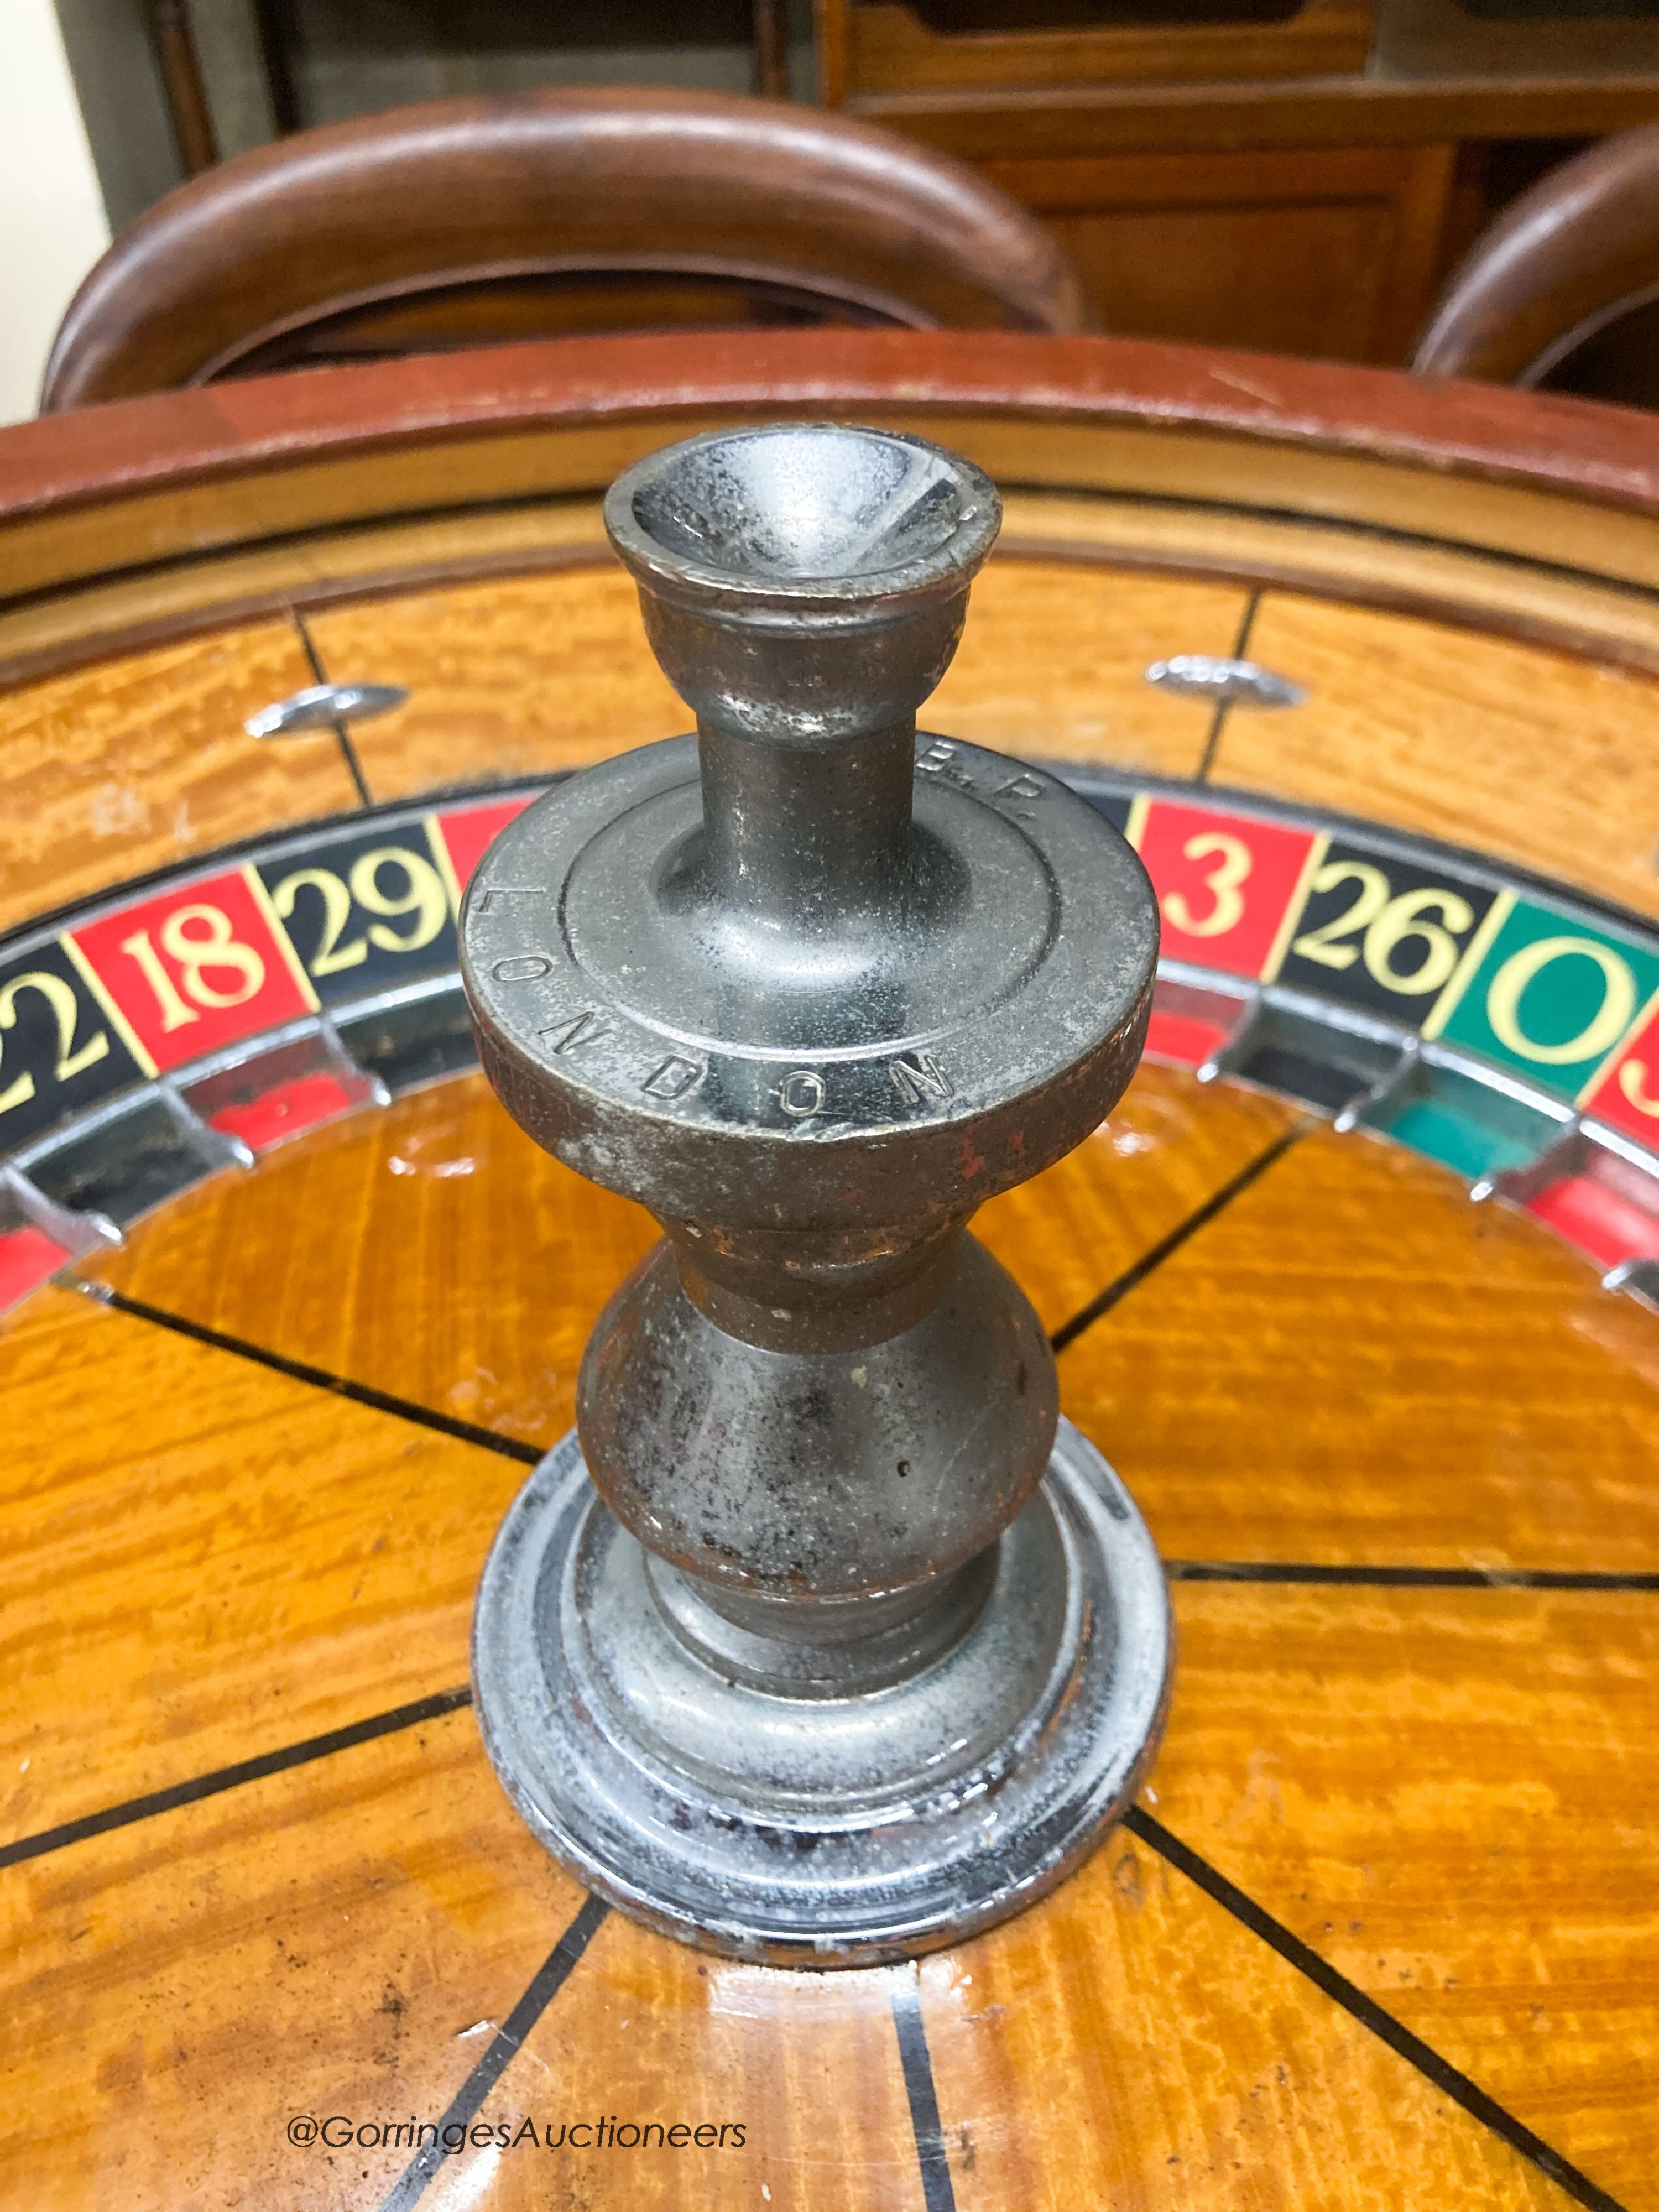 A large A.B.P. London casino roulette wheel, 78cm diameter, with fitted box